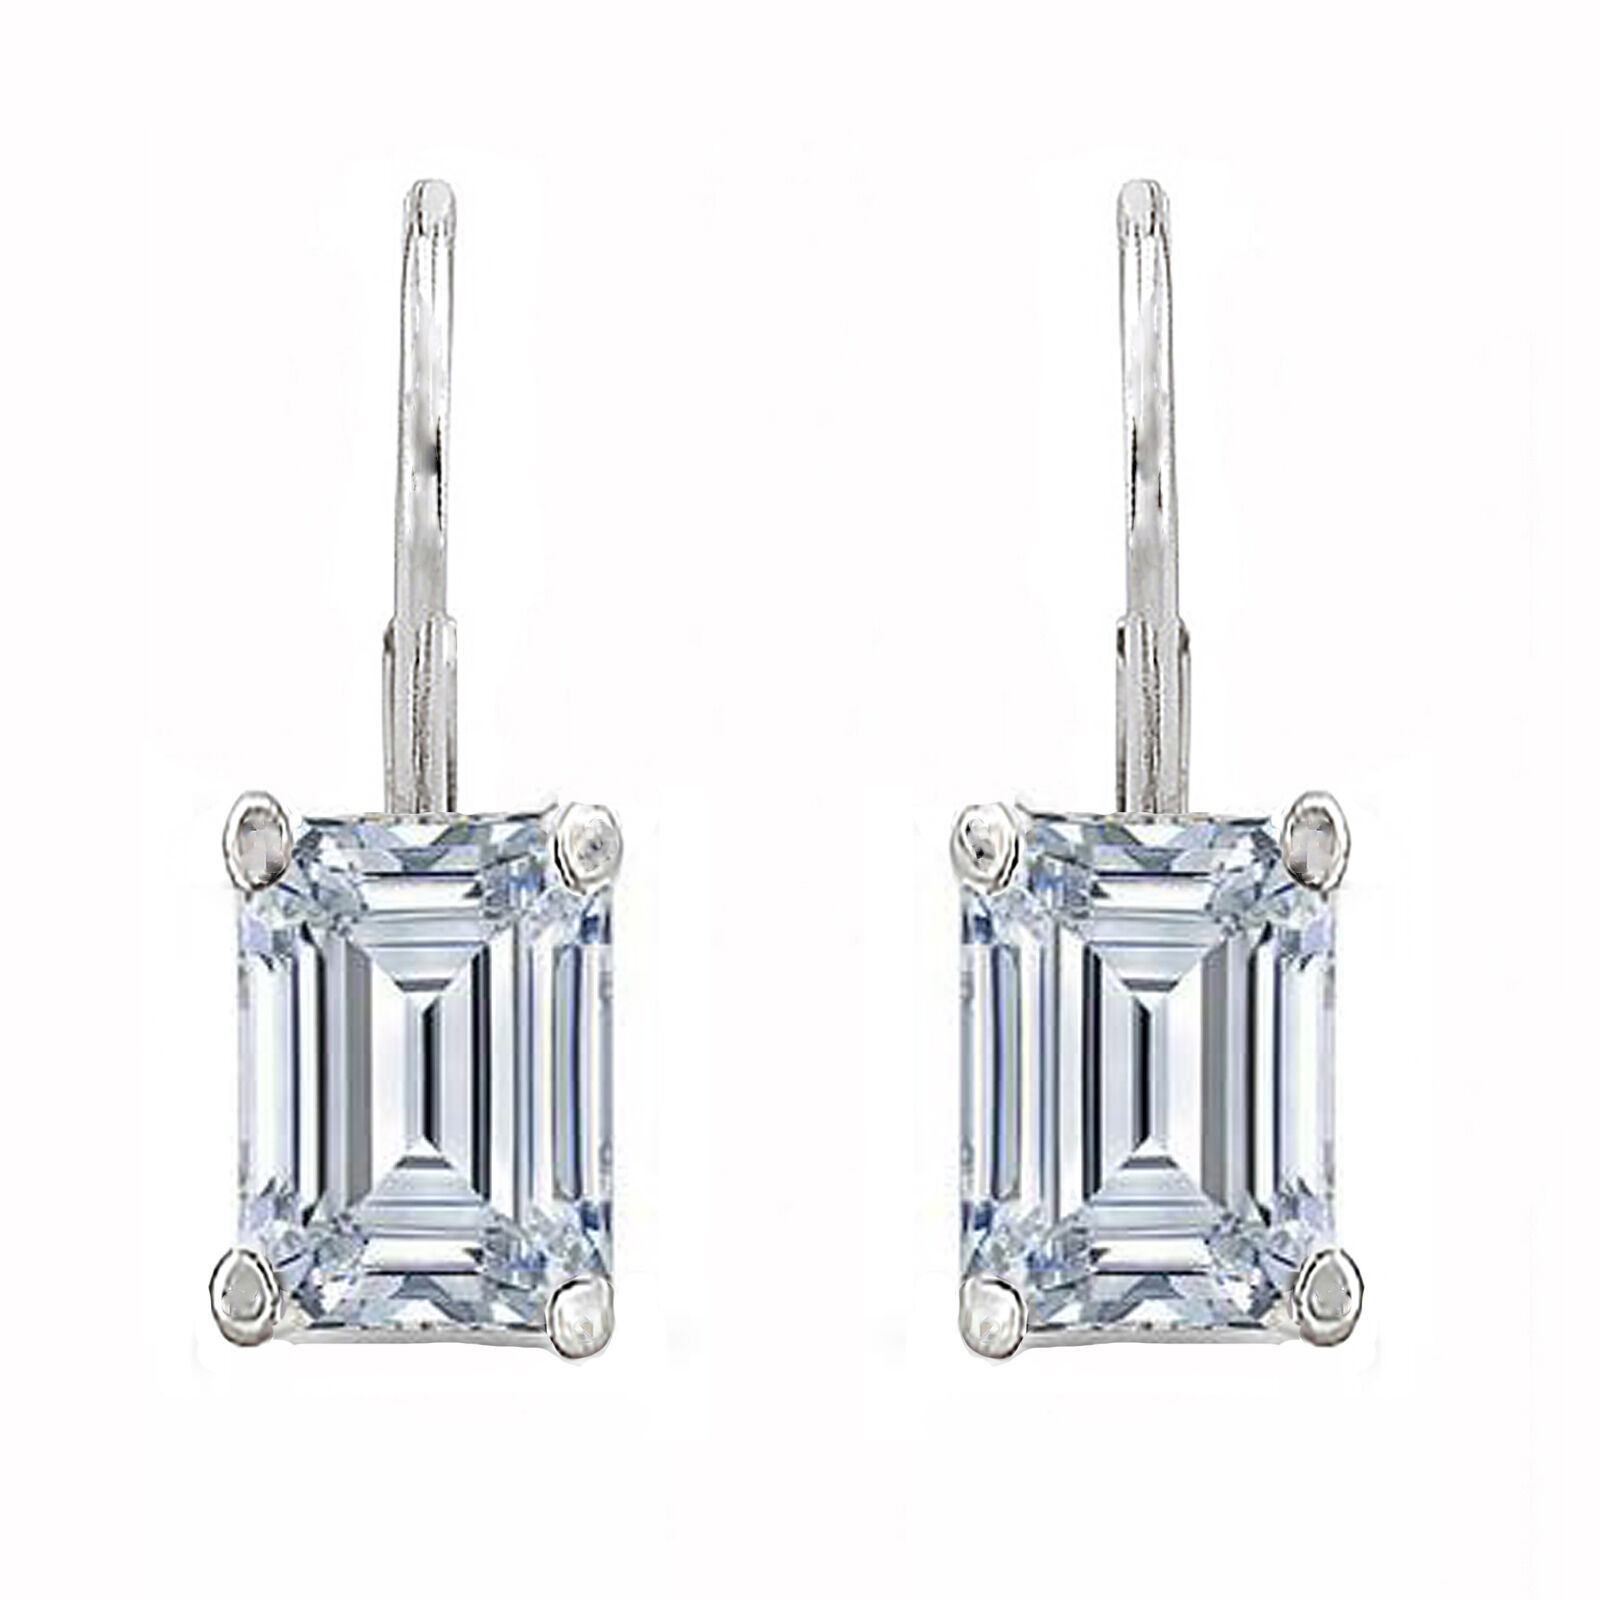 Pre-owned Fancy Special Occasions 2 Ctw Emerald Earrings Studs Solid 14k White Gold Brilliant Cut Basket Leverback